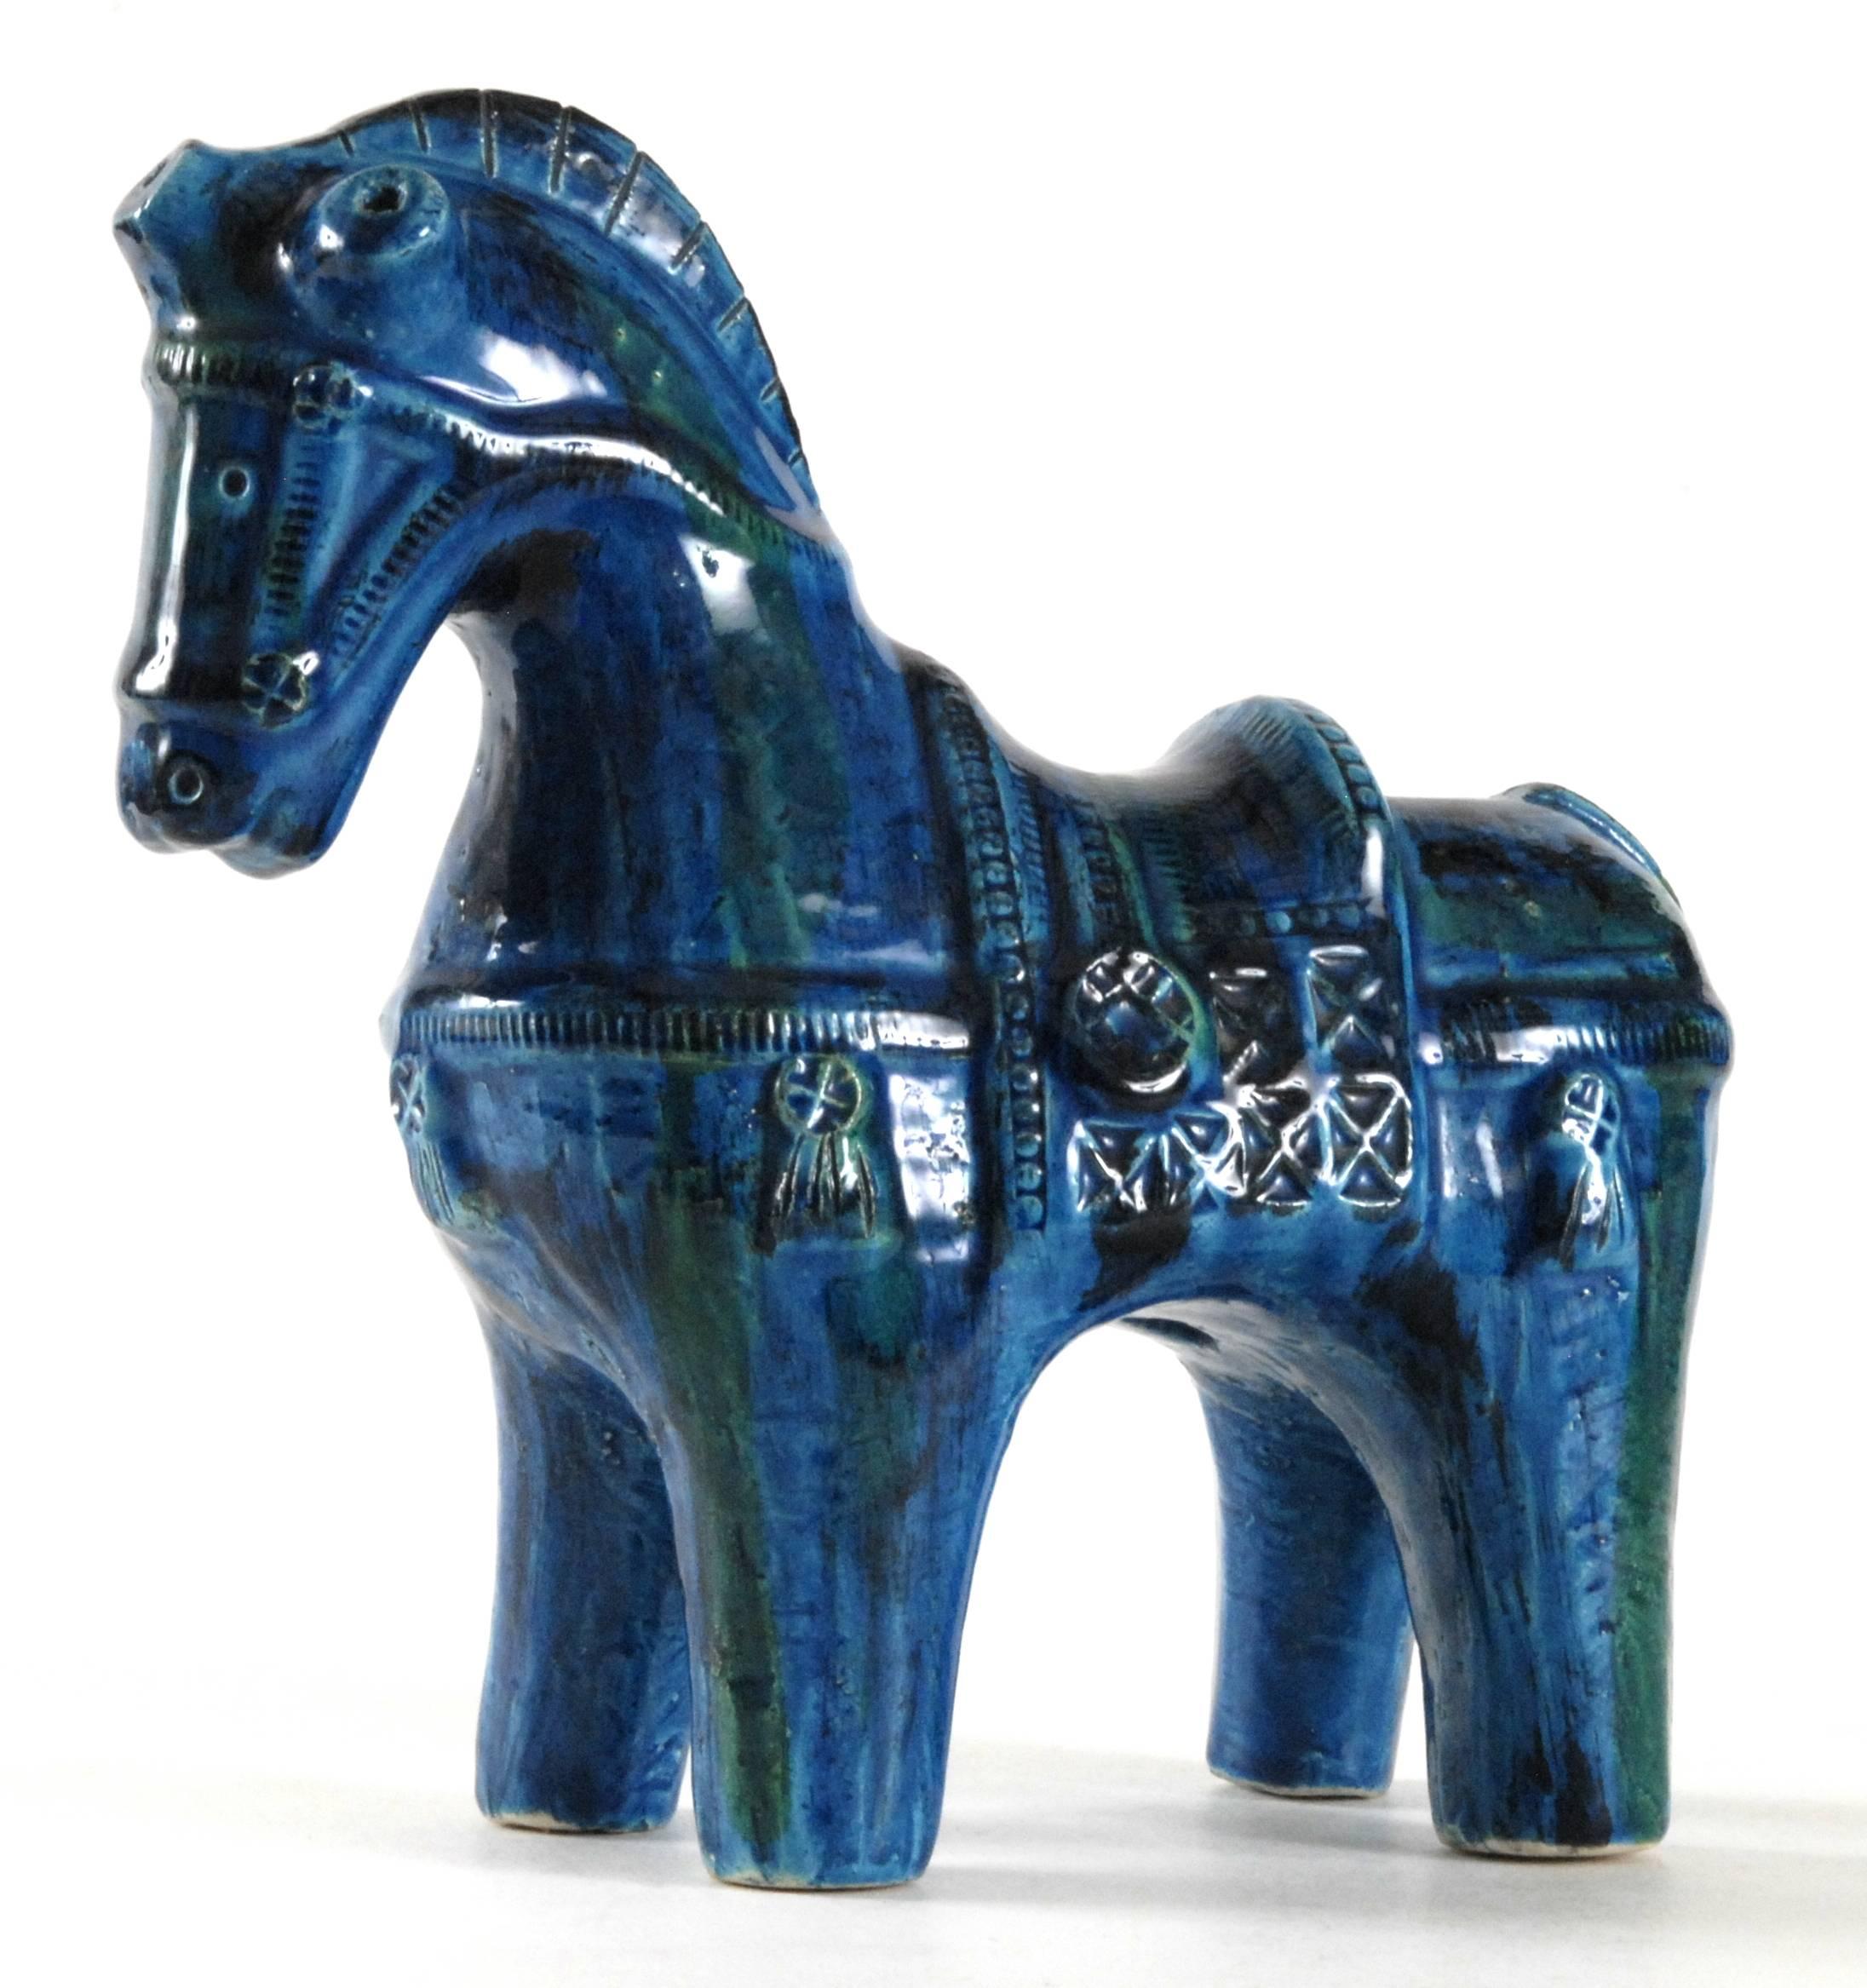 A deep 'Rimini Blu' glazed horse by Aldo Londi for Bitossi. Brilliant glaze with streaks of green over the highly detailed trappings.